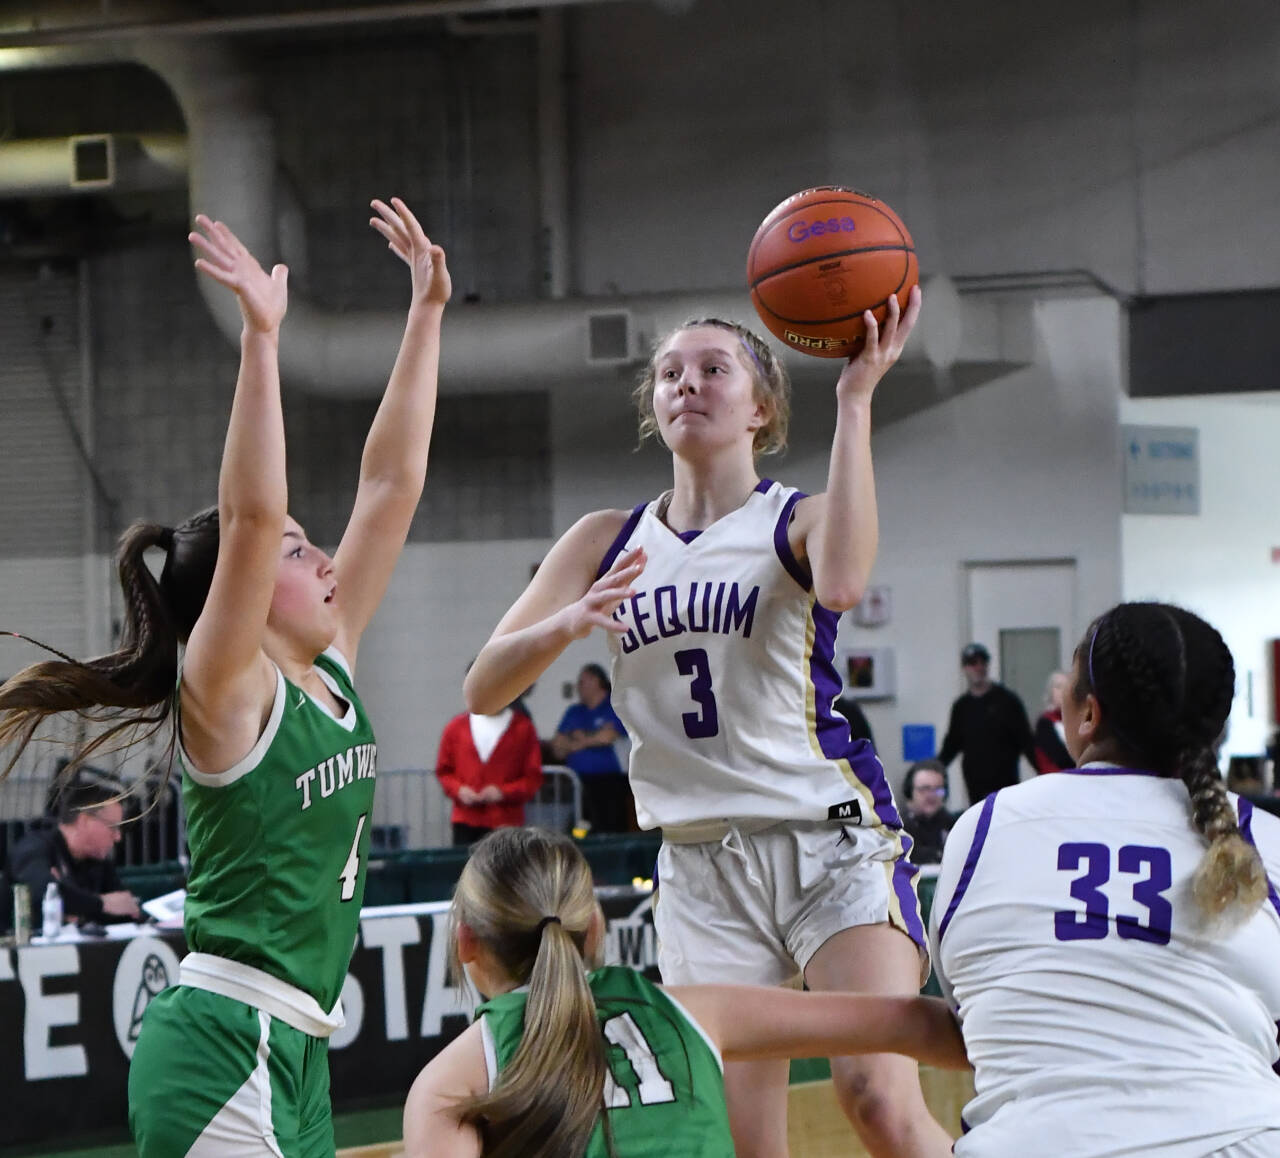 Photo by Jim Heintz /With teammate Jelissa Julmist (33) looking on, Sequim’s Jolene Vaara rises up for a shot in the Wolves’ 38-24 win over Tumwater at the class 2A state tournament on March 3. Defending on the play are Tumwater’s Morgan Simmons (4) and Kylie Waltermeyer.